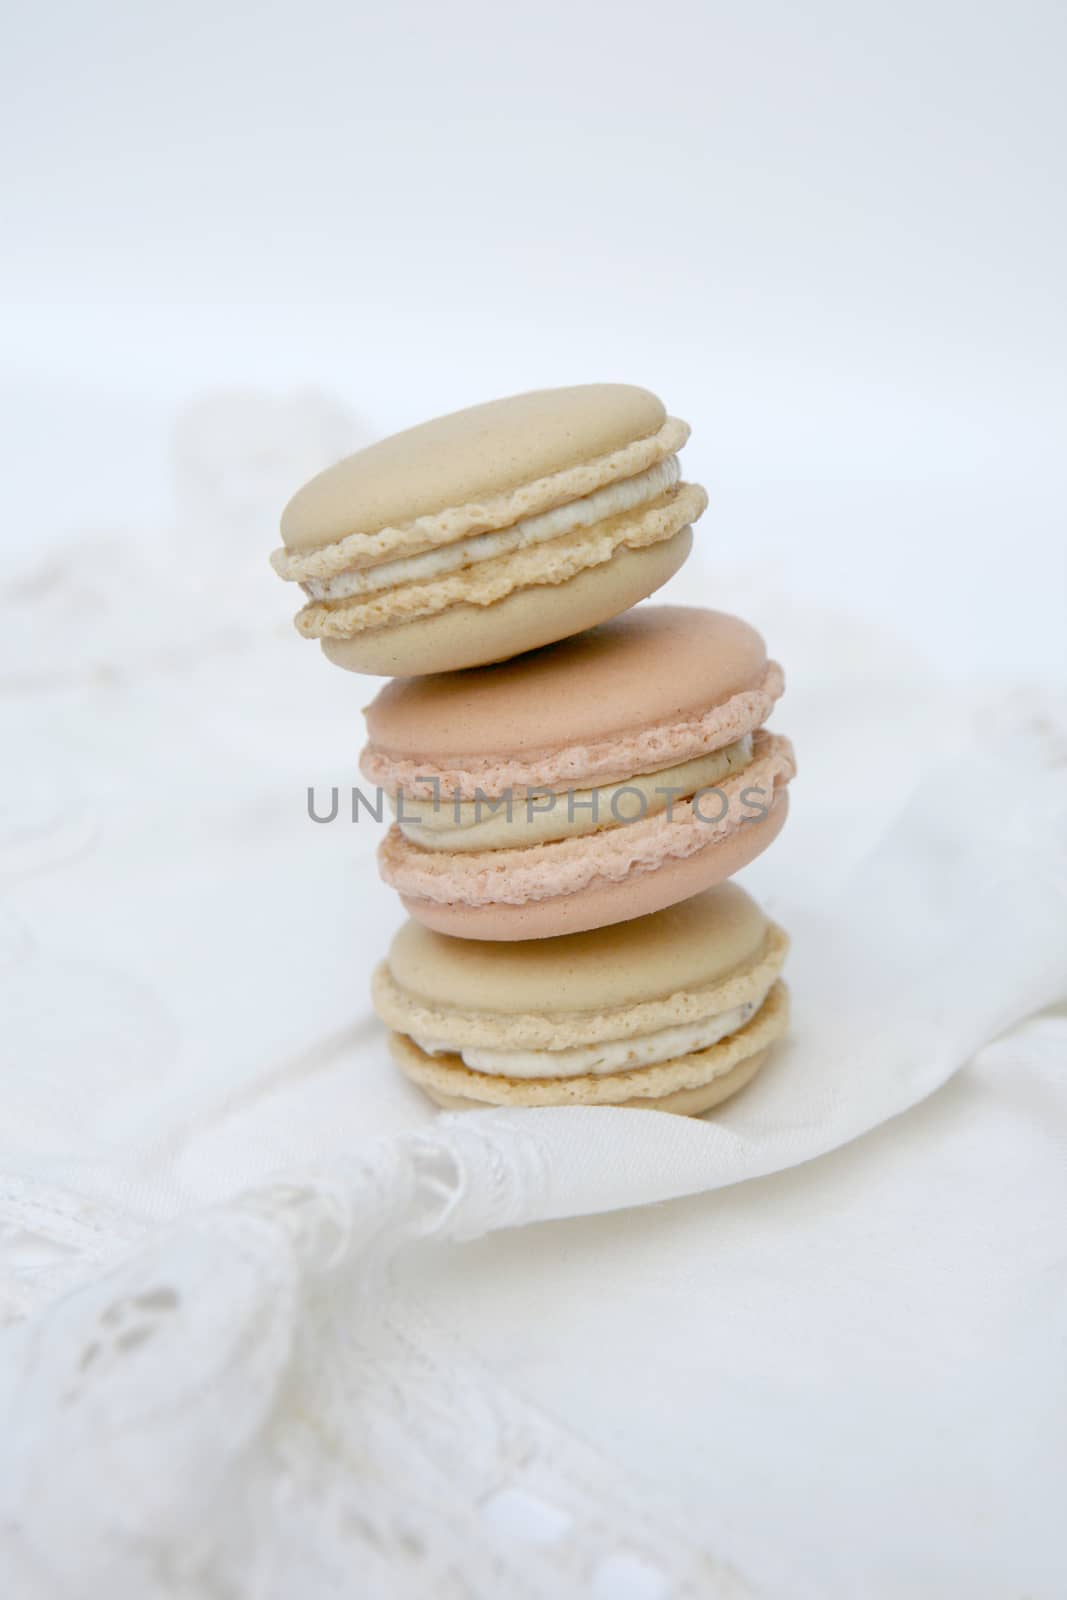 Macaron is a sweet dessert made from polymer mixtures rack sink with egg whites, icing sugar, white sugar, almond powder or almond meal. And food coloring Macaron shape sandwich A splice two pieces of bread Have stuffed the middle